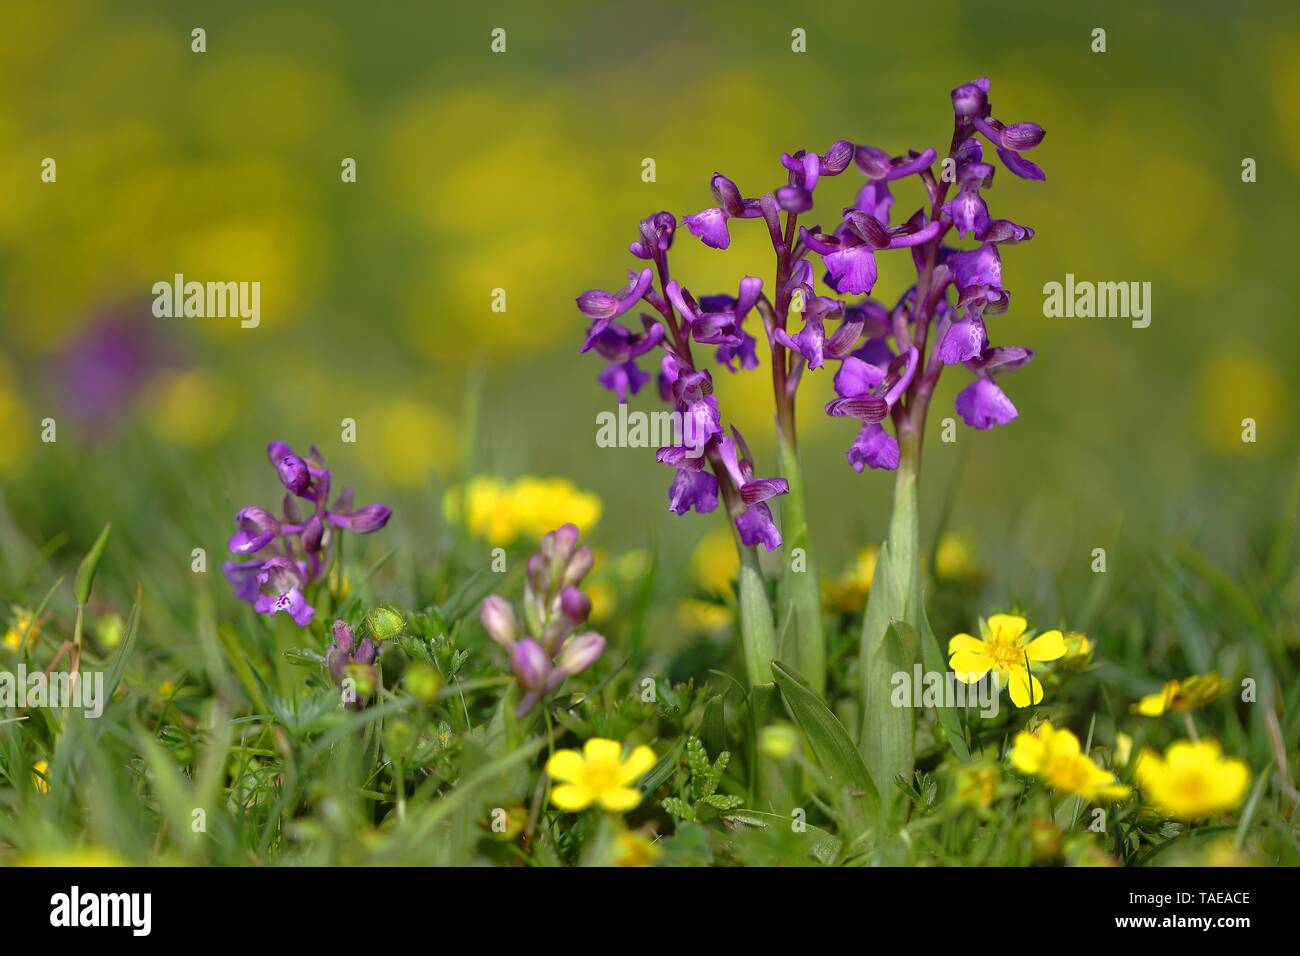 Green-winged orchid (Anacamptis morio) blooms in a meadow, Hesse, Germany Stock Photo